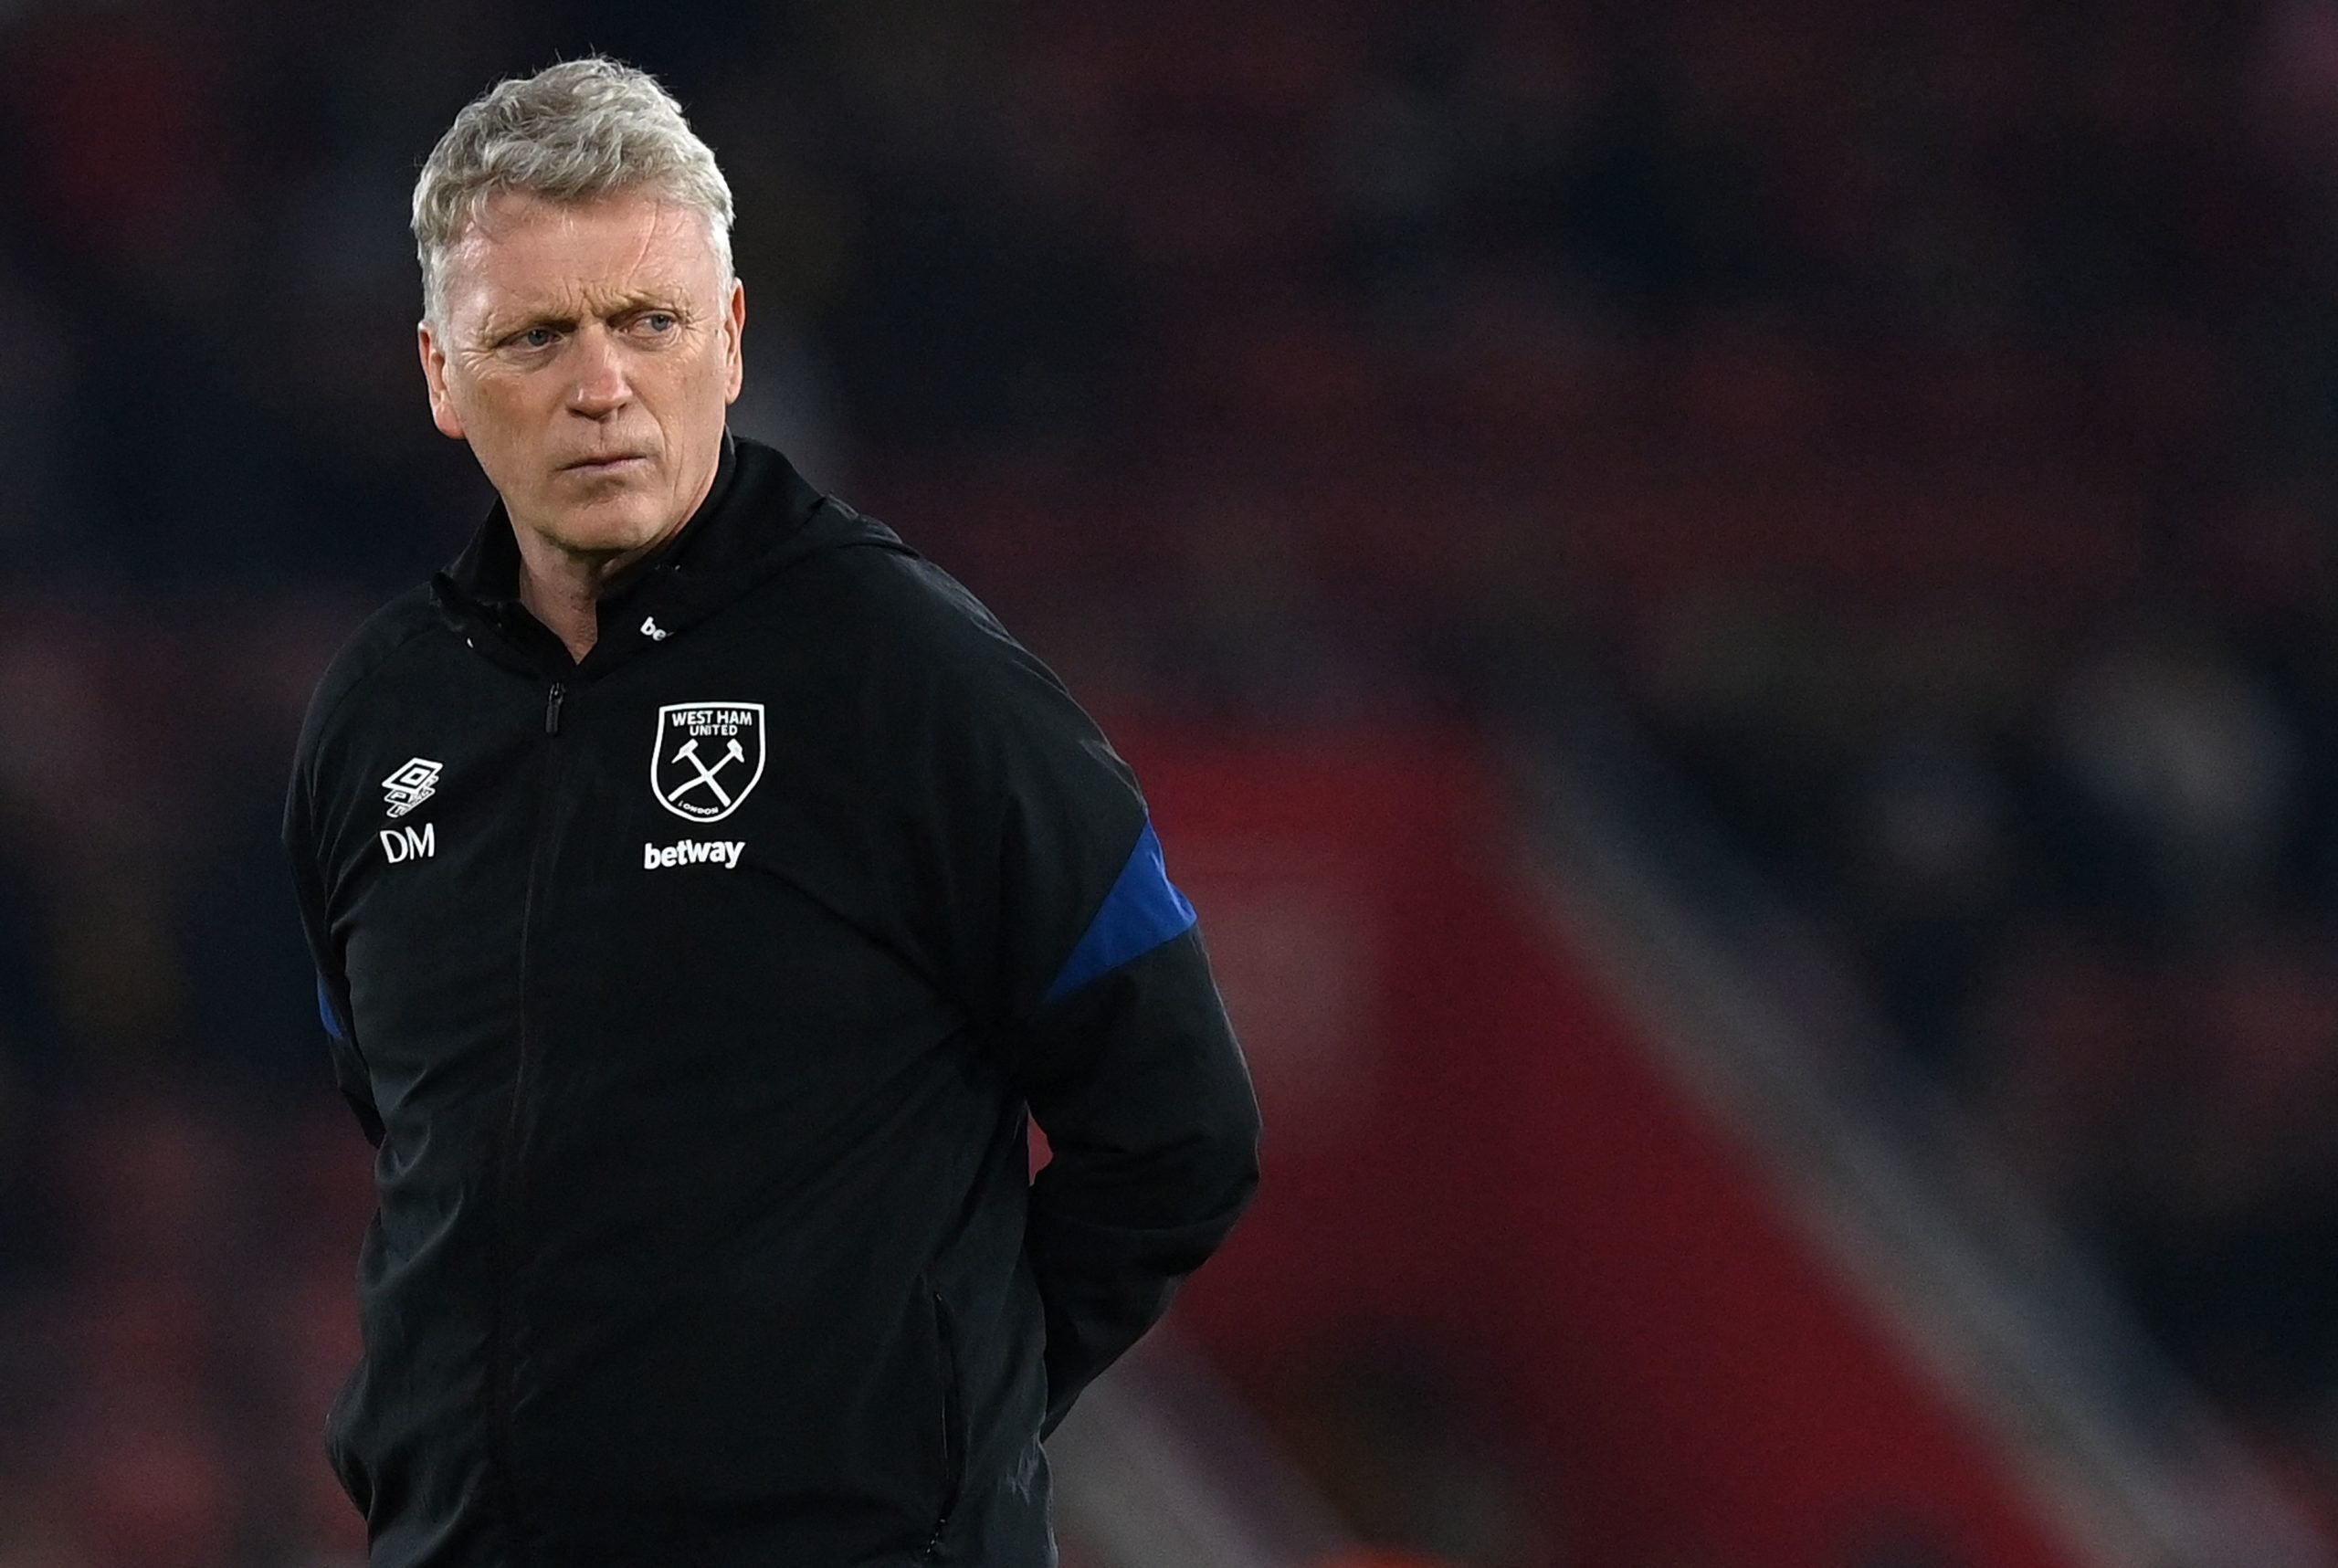 David Moyes raves about unsung West Ham hero who went under the radar in excruciating defeat to Liverpool